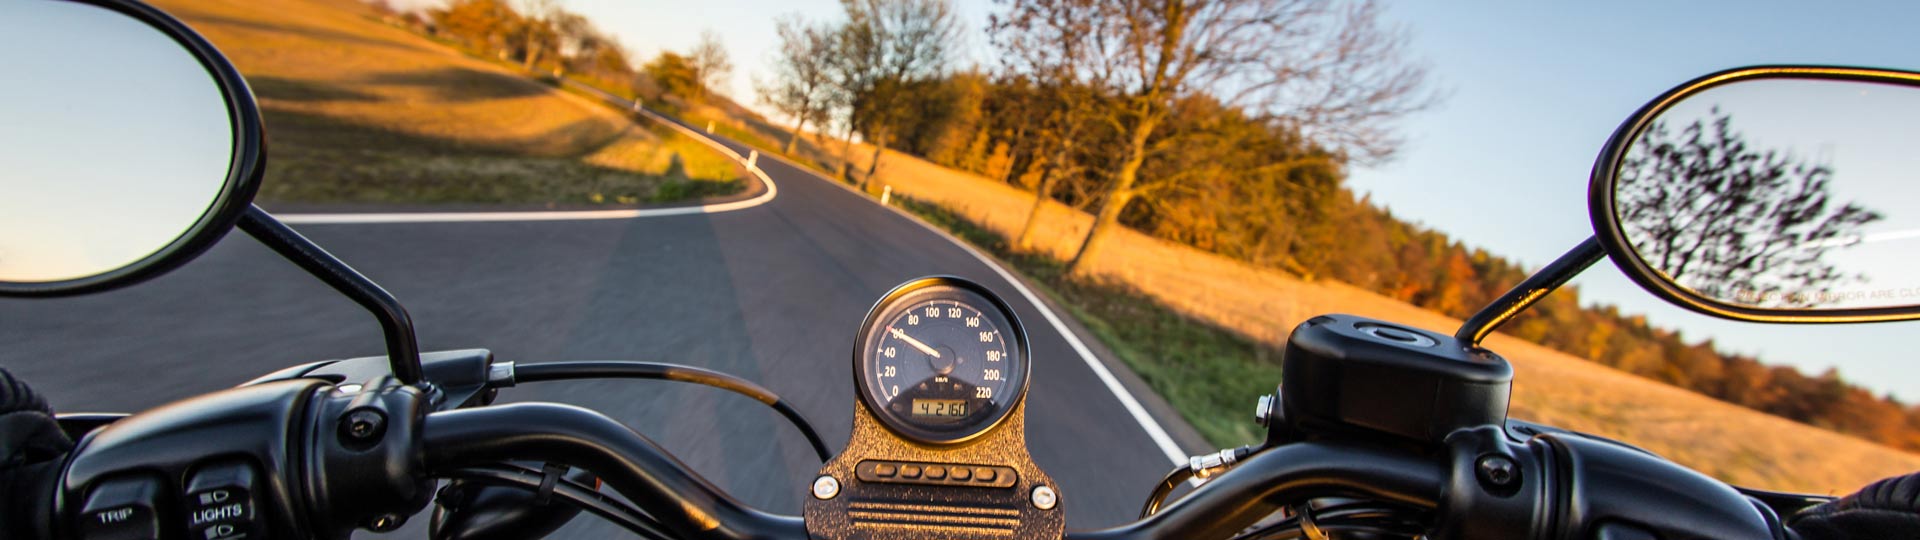 First-person view of a motorbike on the road